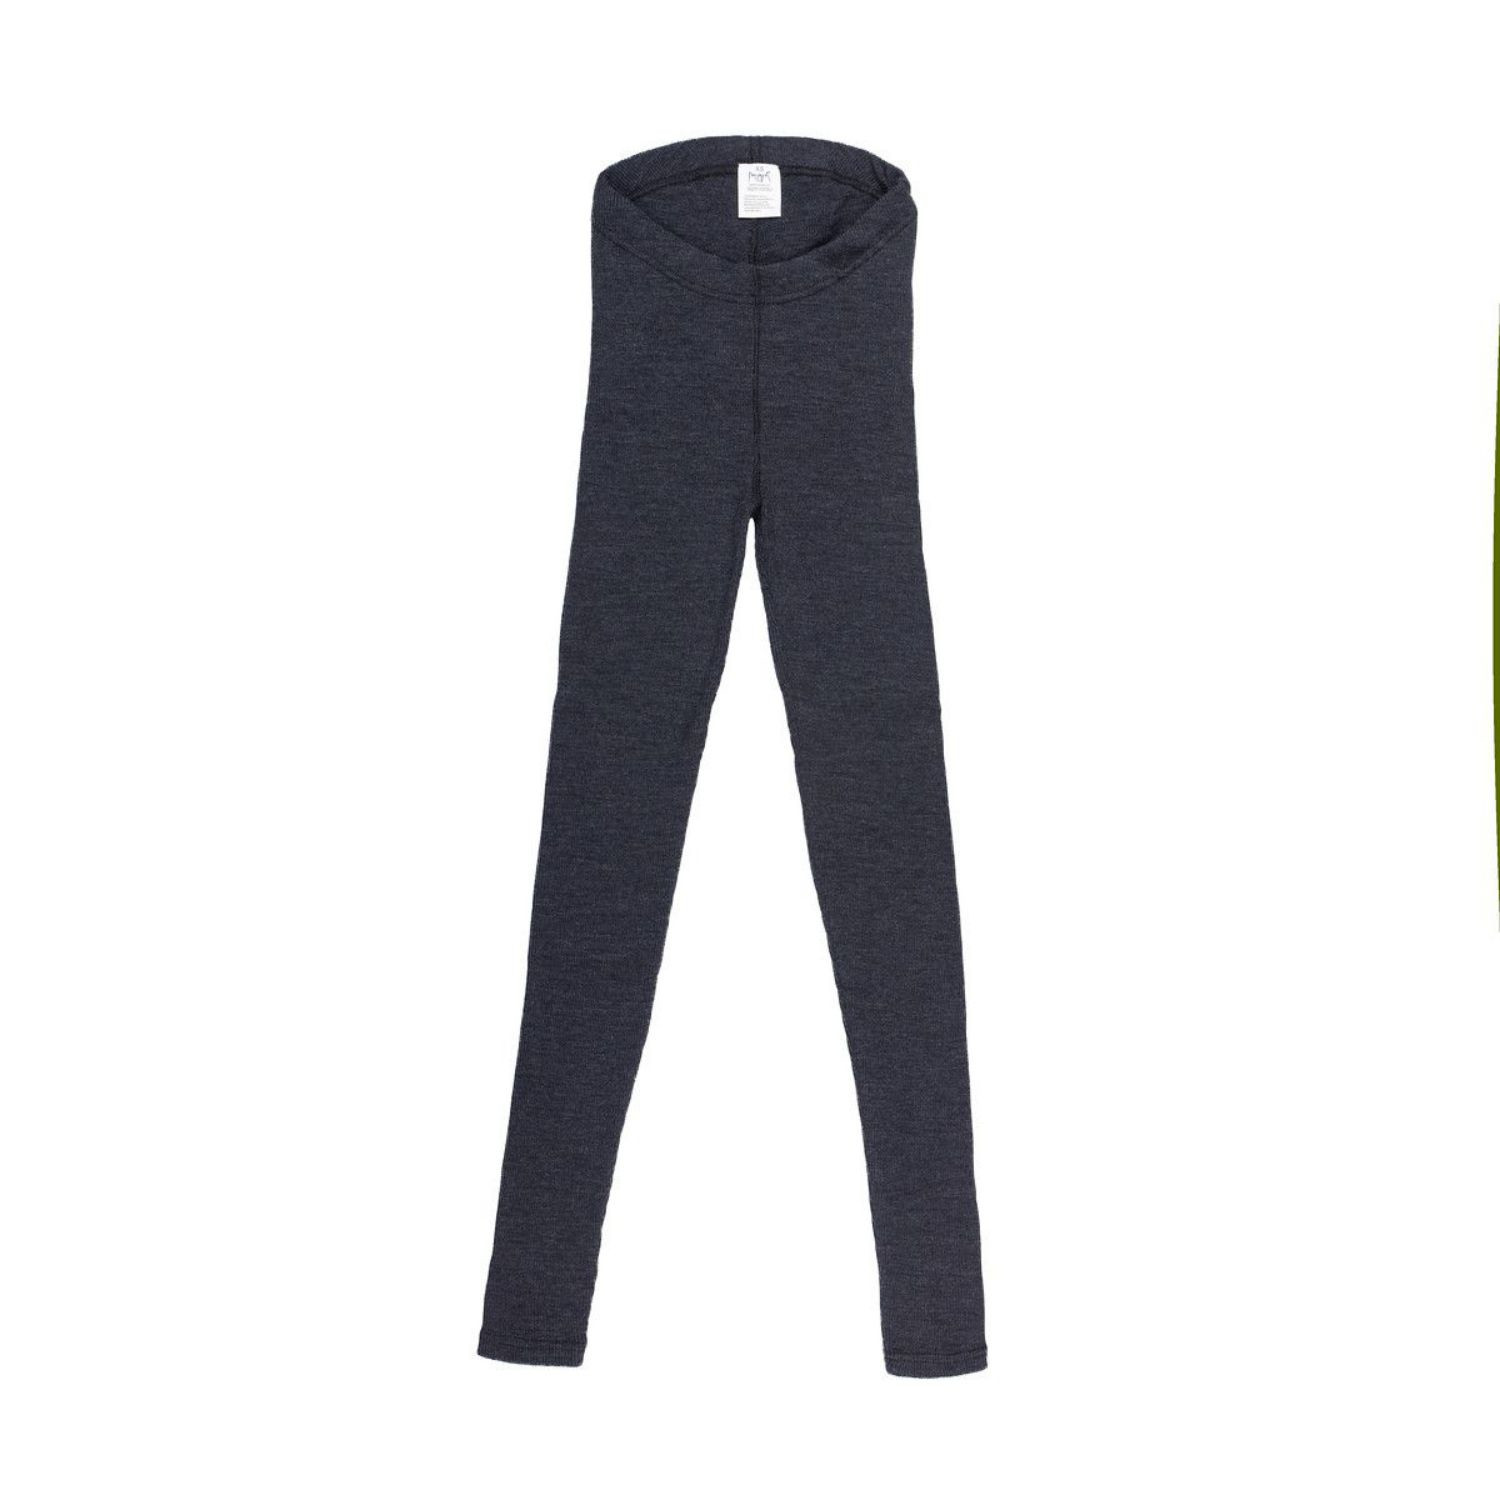 MaM All-Time Leggings aus Wolle